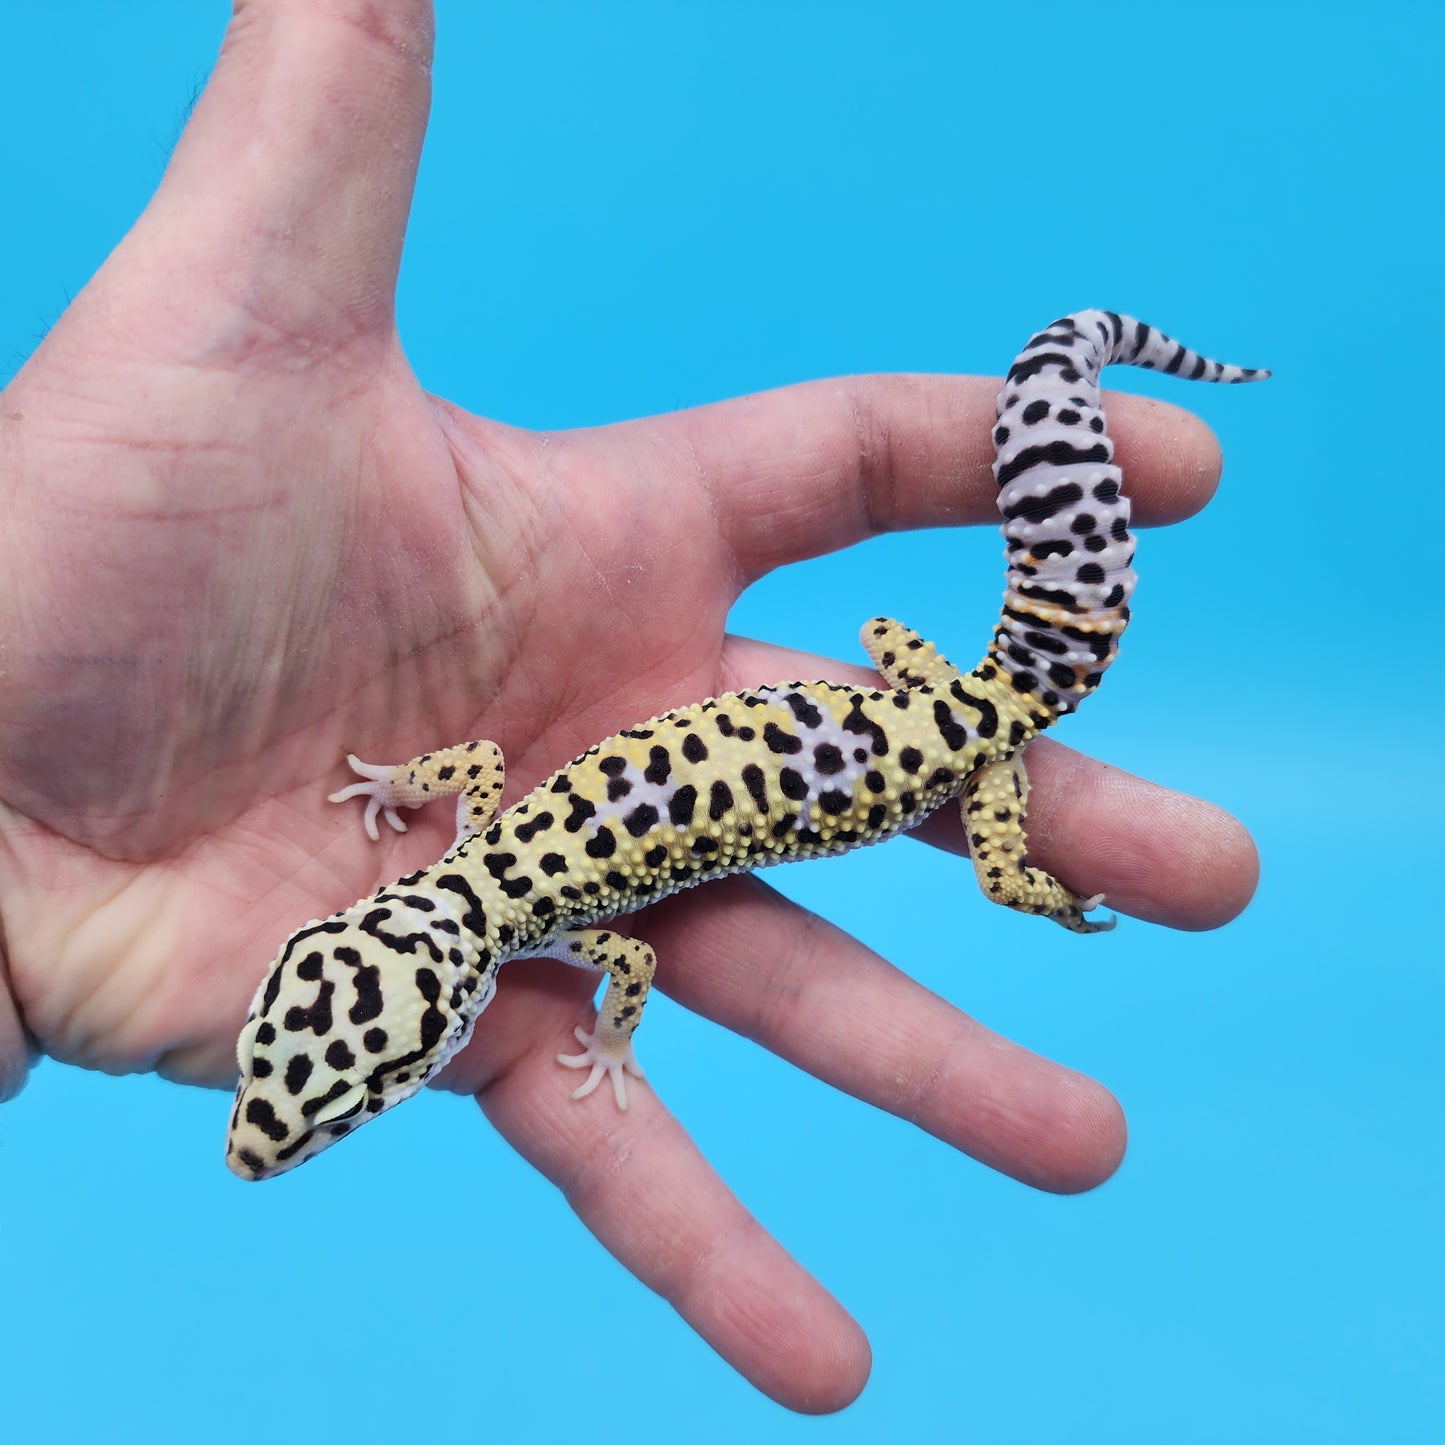 Male Hyper Xanthic Afghanicus Bold Bandit Leopard Gecko